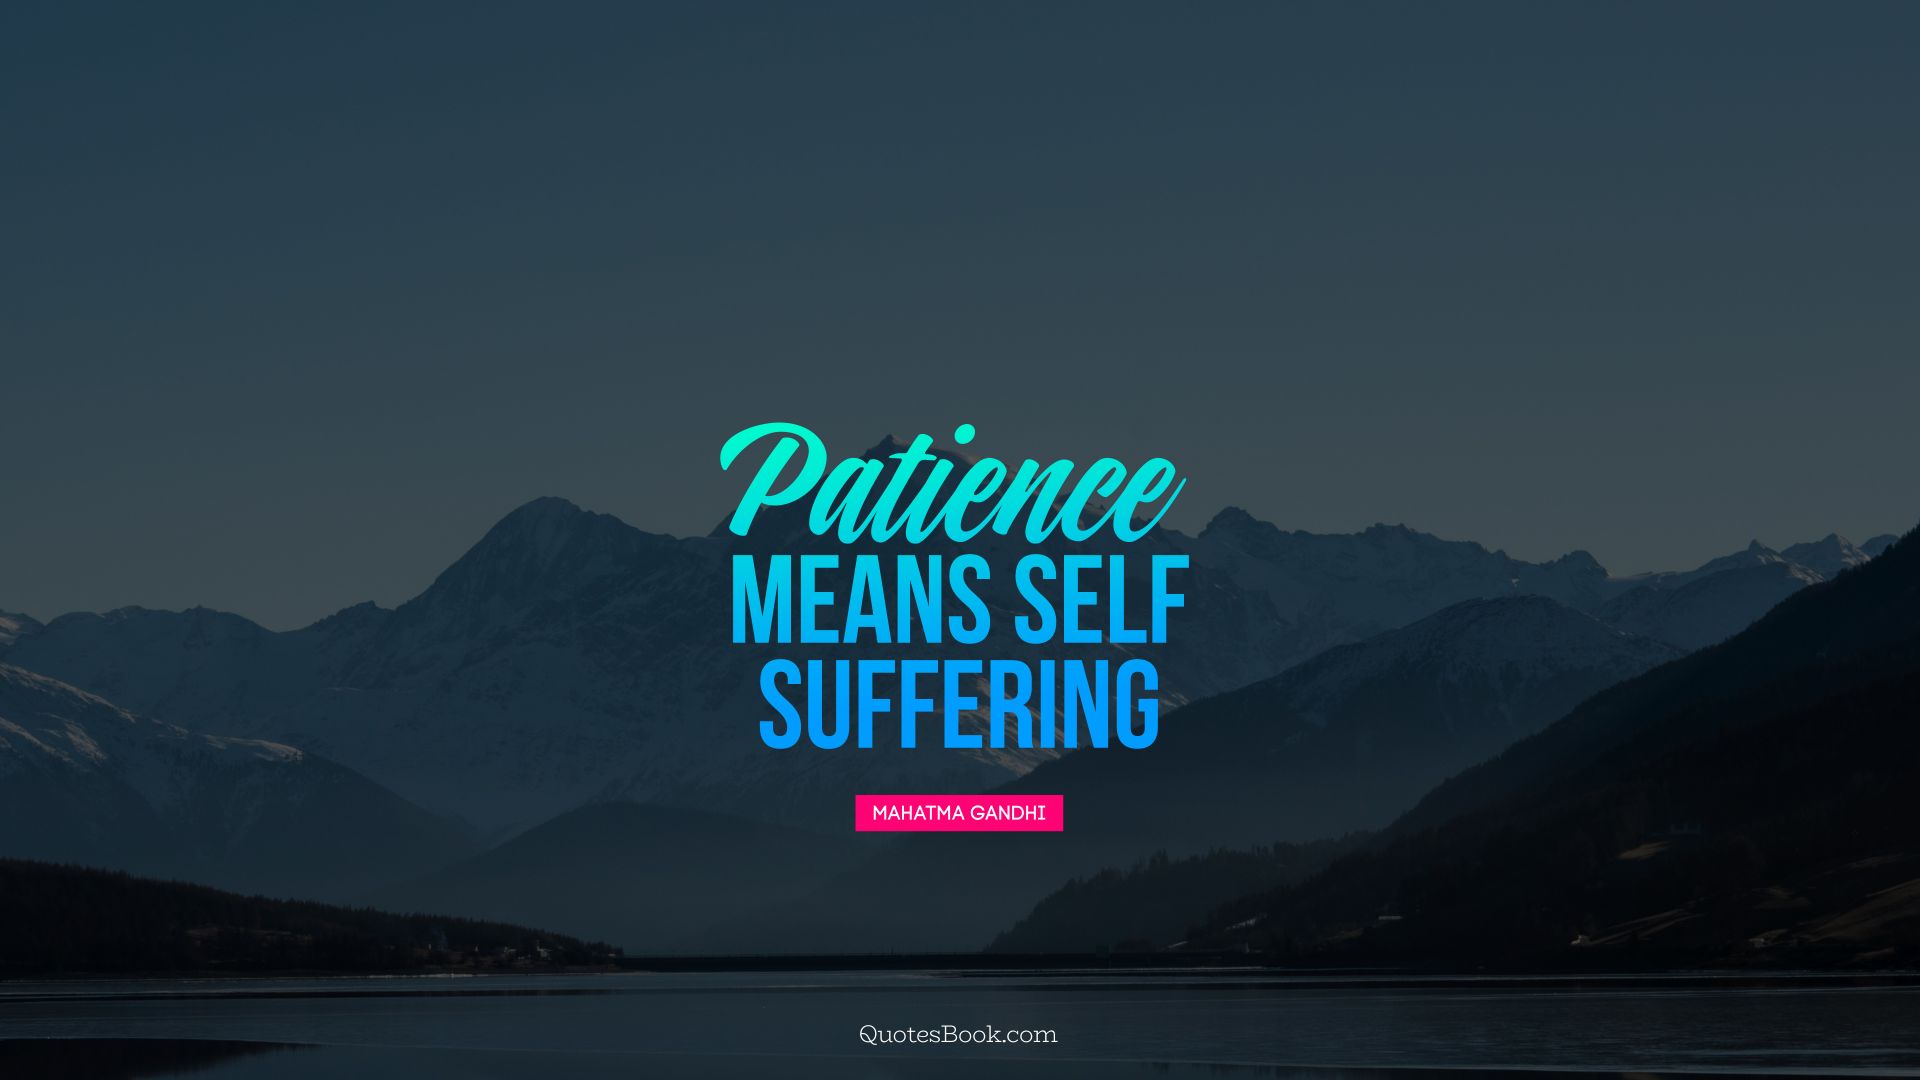 Patience means self-suffering. - Quote by Mahatma Gandhi